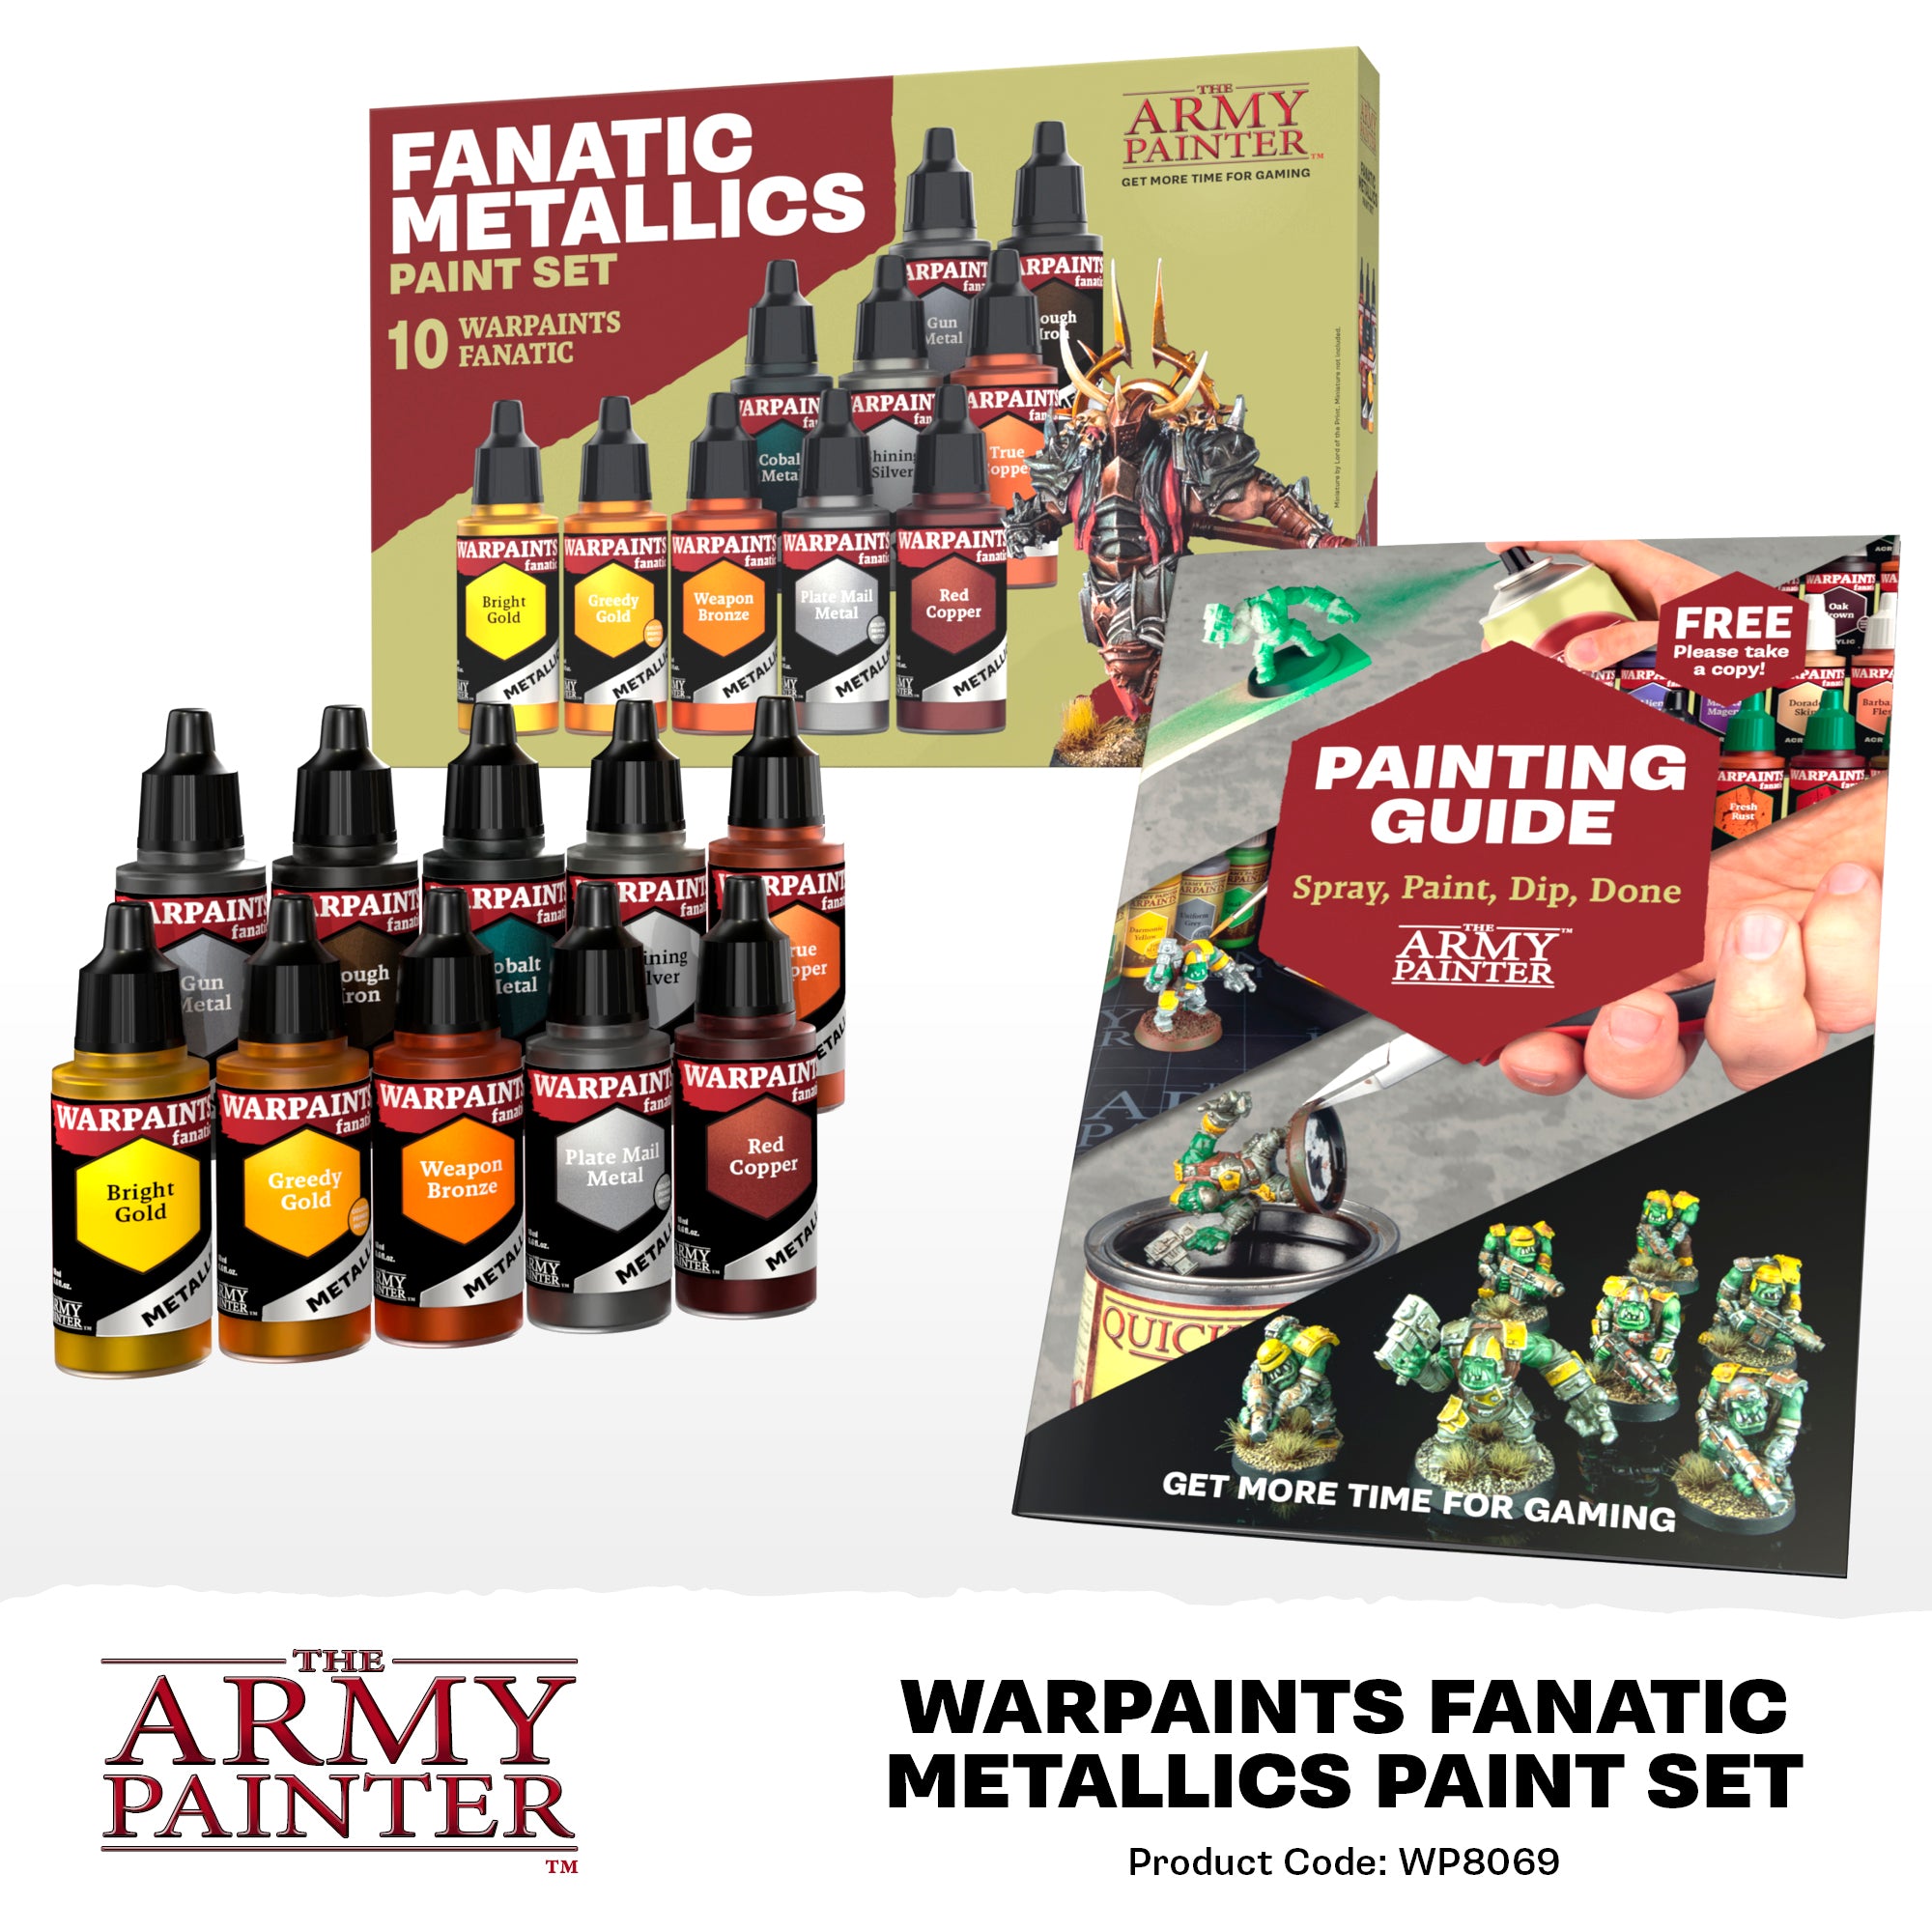 Major Army Painter Restock Is Up!